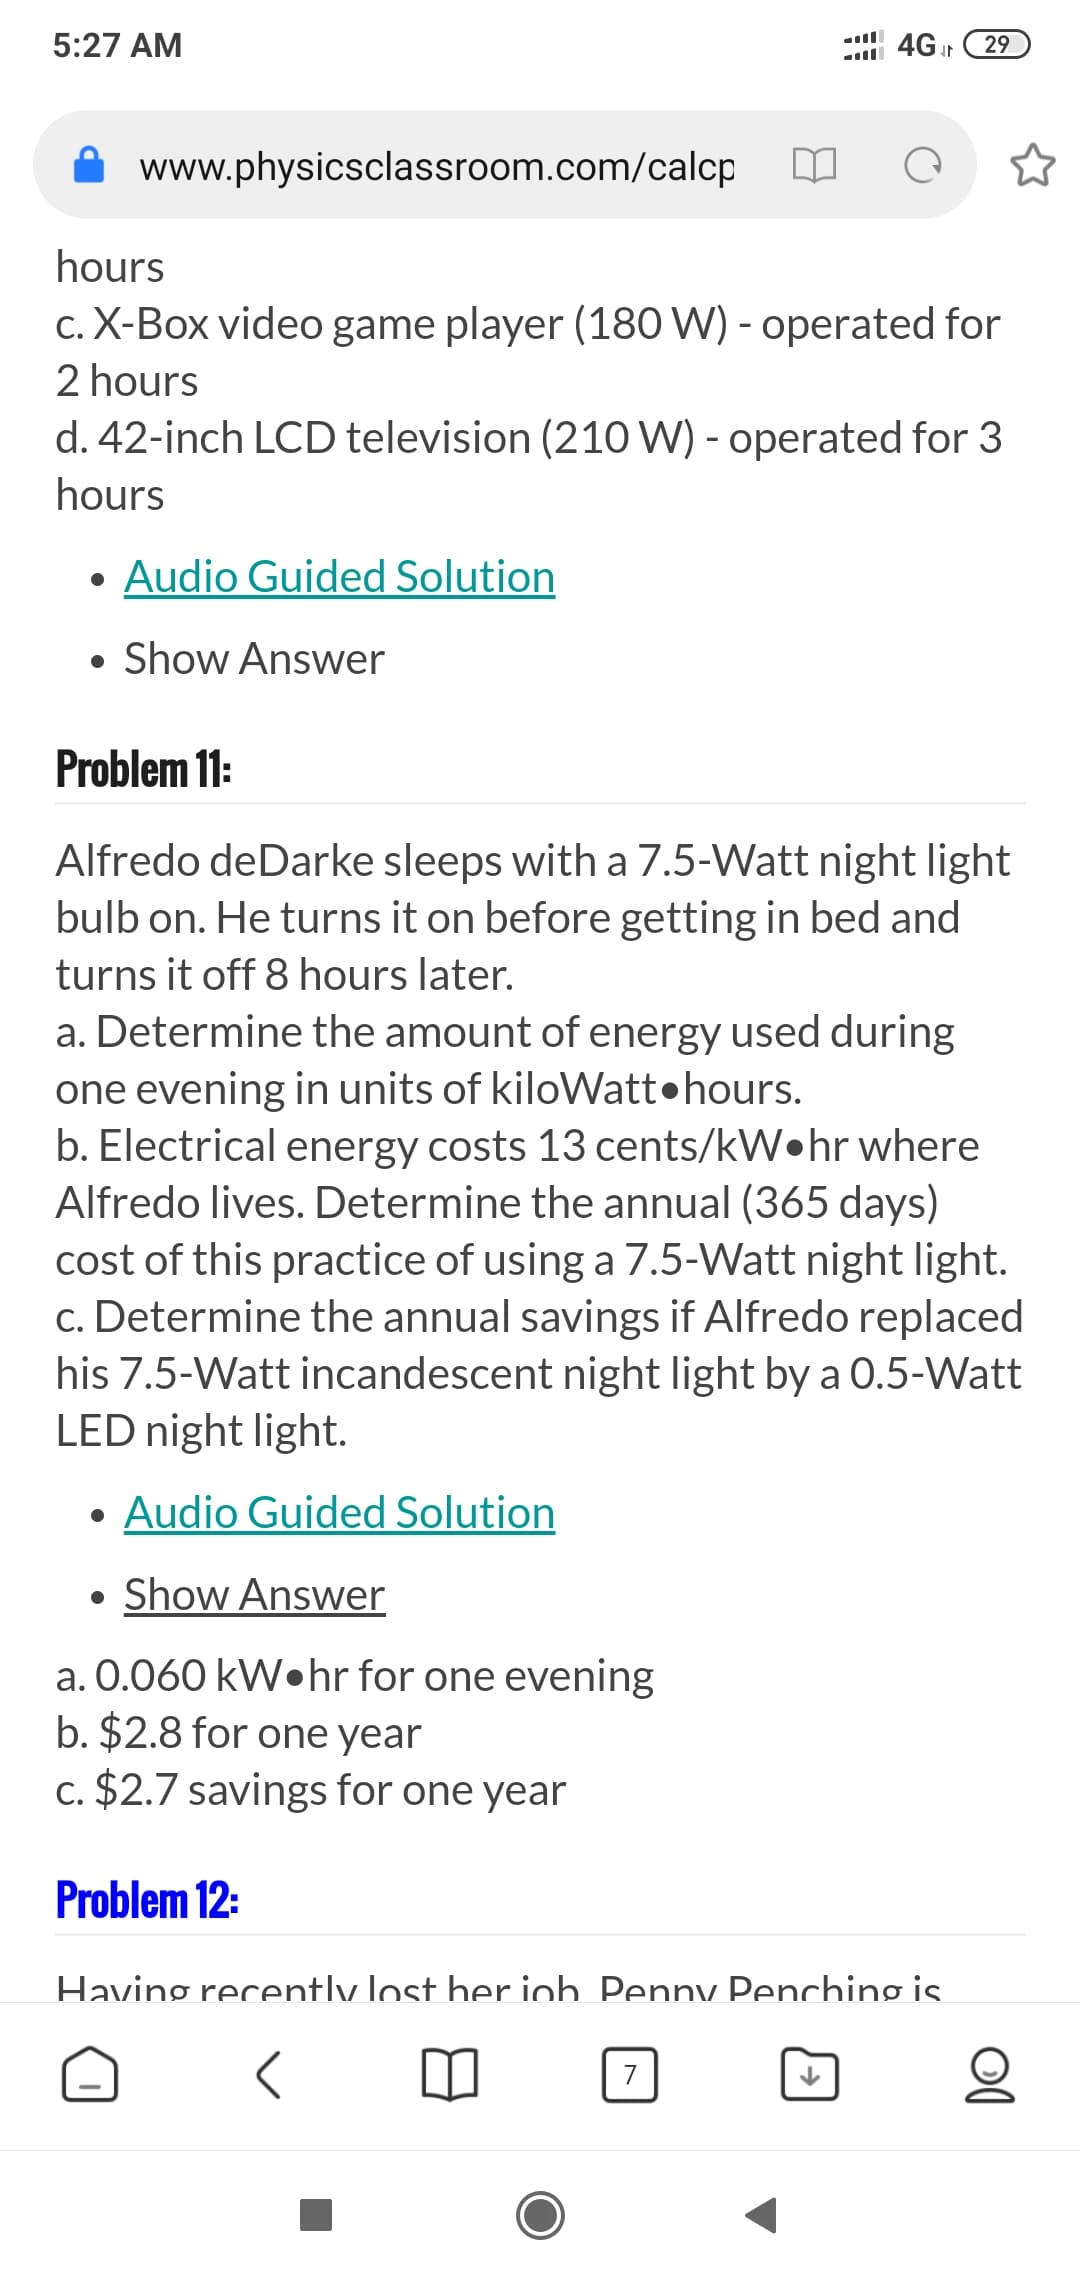 Alfredo deDarke sleeps with a 7.5-Watt night light
bulb on. He turns it on before getting in bed and
turns it off 8 hours later.
a. Determine the amount of energy used during
one evening in units of kiloWatt•hours.
b. Electrical energy costs 13 cents/kW•hr where
Alfredo lives. Determine the annual (365 days)
cost of this practice of using a 7.5-Watt night light.
c. Determine the annual savings if Alfredo replaced
his 7.5-Watt incandescent night light by a O.5-Watt
LED night light.
